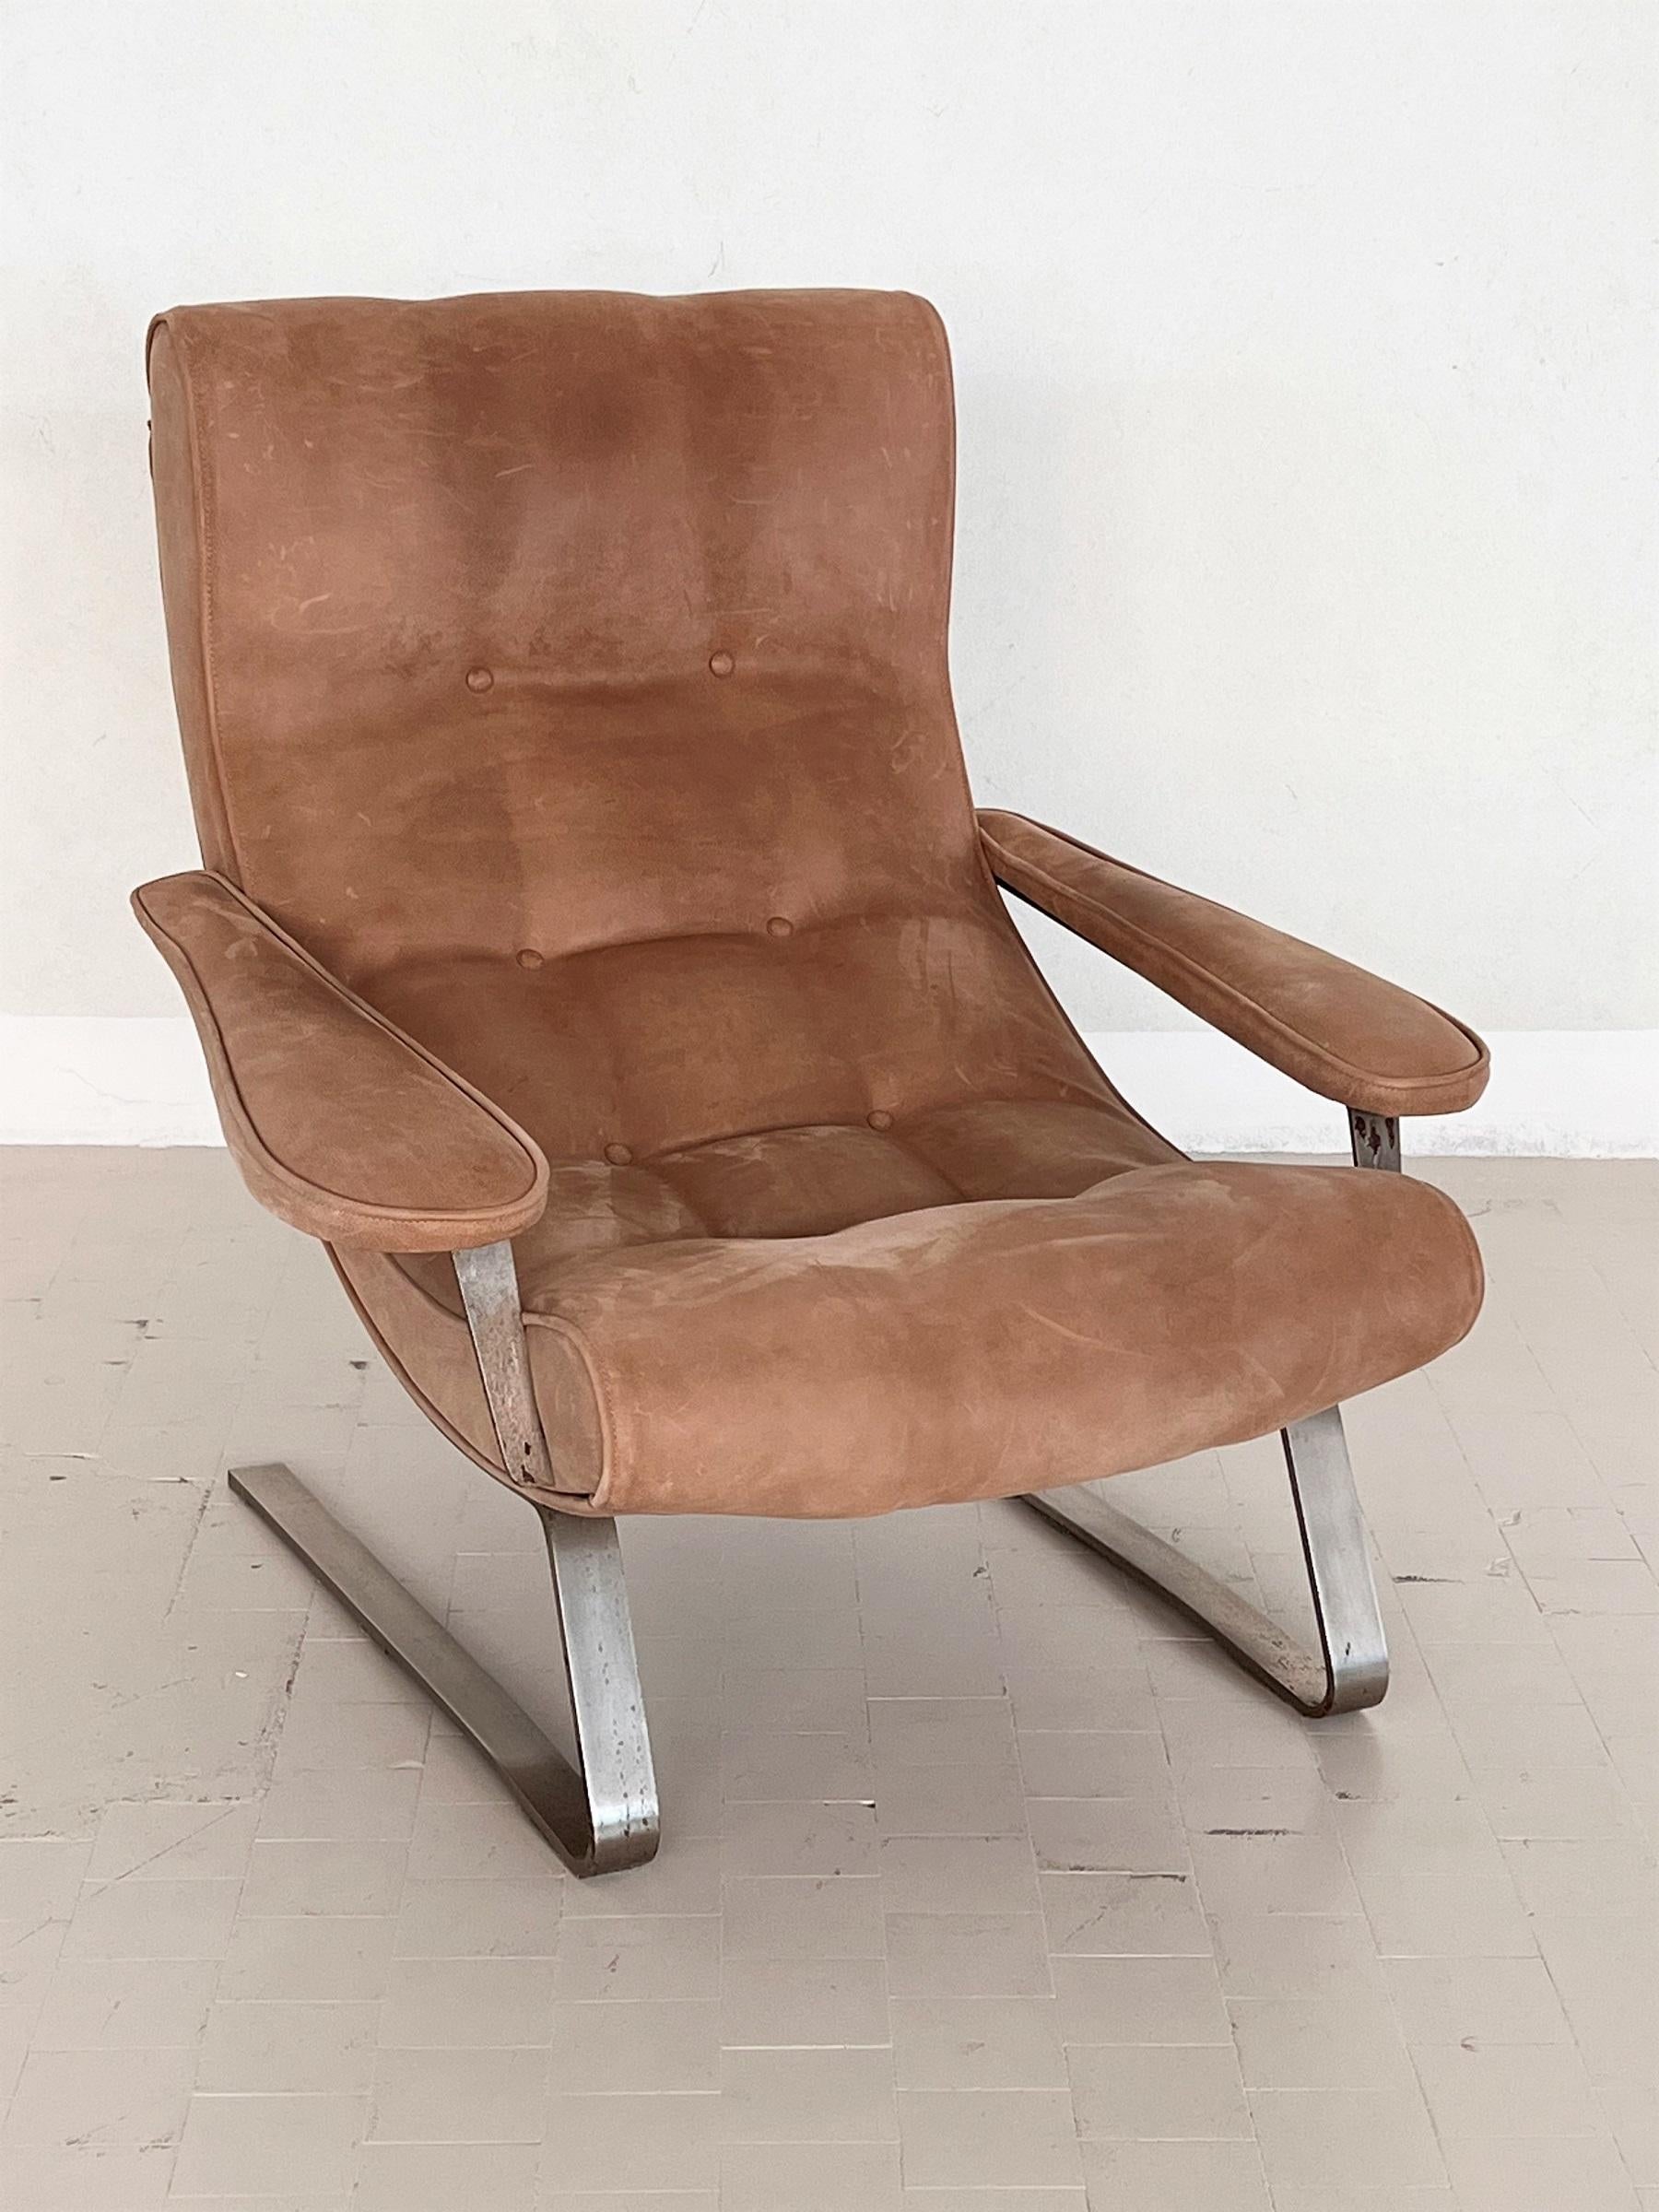 Midcentury Lounge Chair in Suede by Guido Bonzani for Tecnosalotto, 1970s For Sale 12